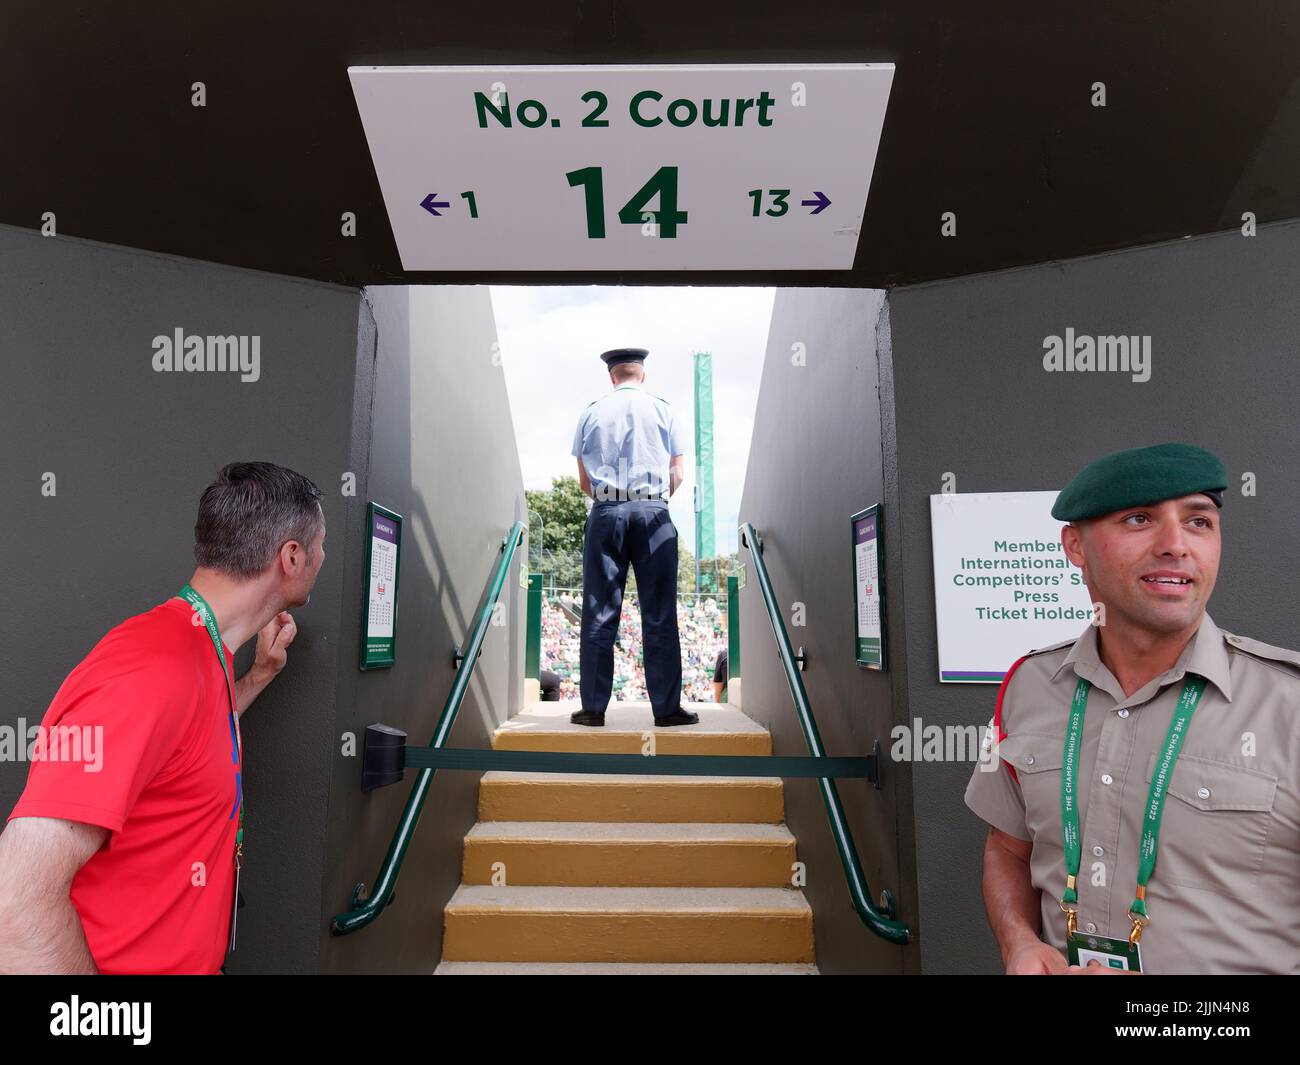 Wimbledon, Greater London, England, July 02 2022: Wimbledon Tennis Championship. An official guards as entrance to number two court. Stock Photo